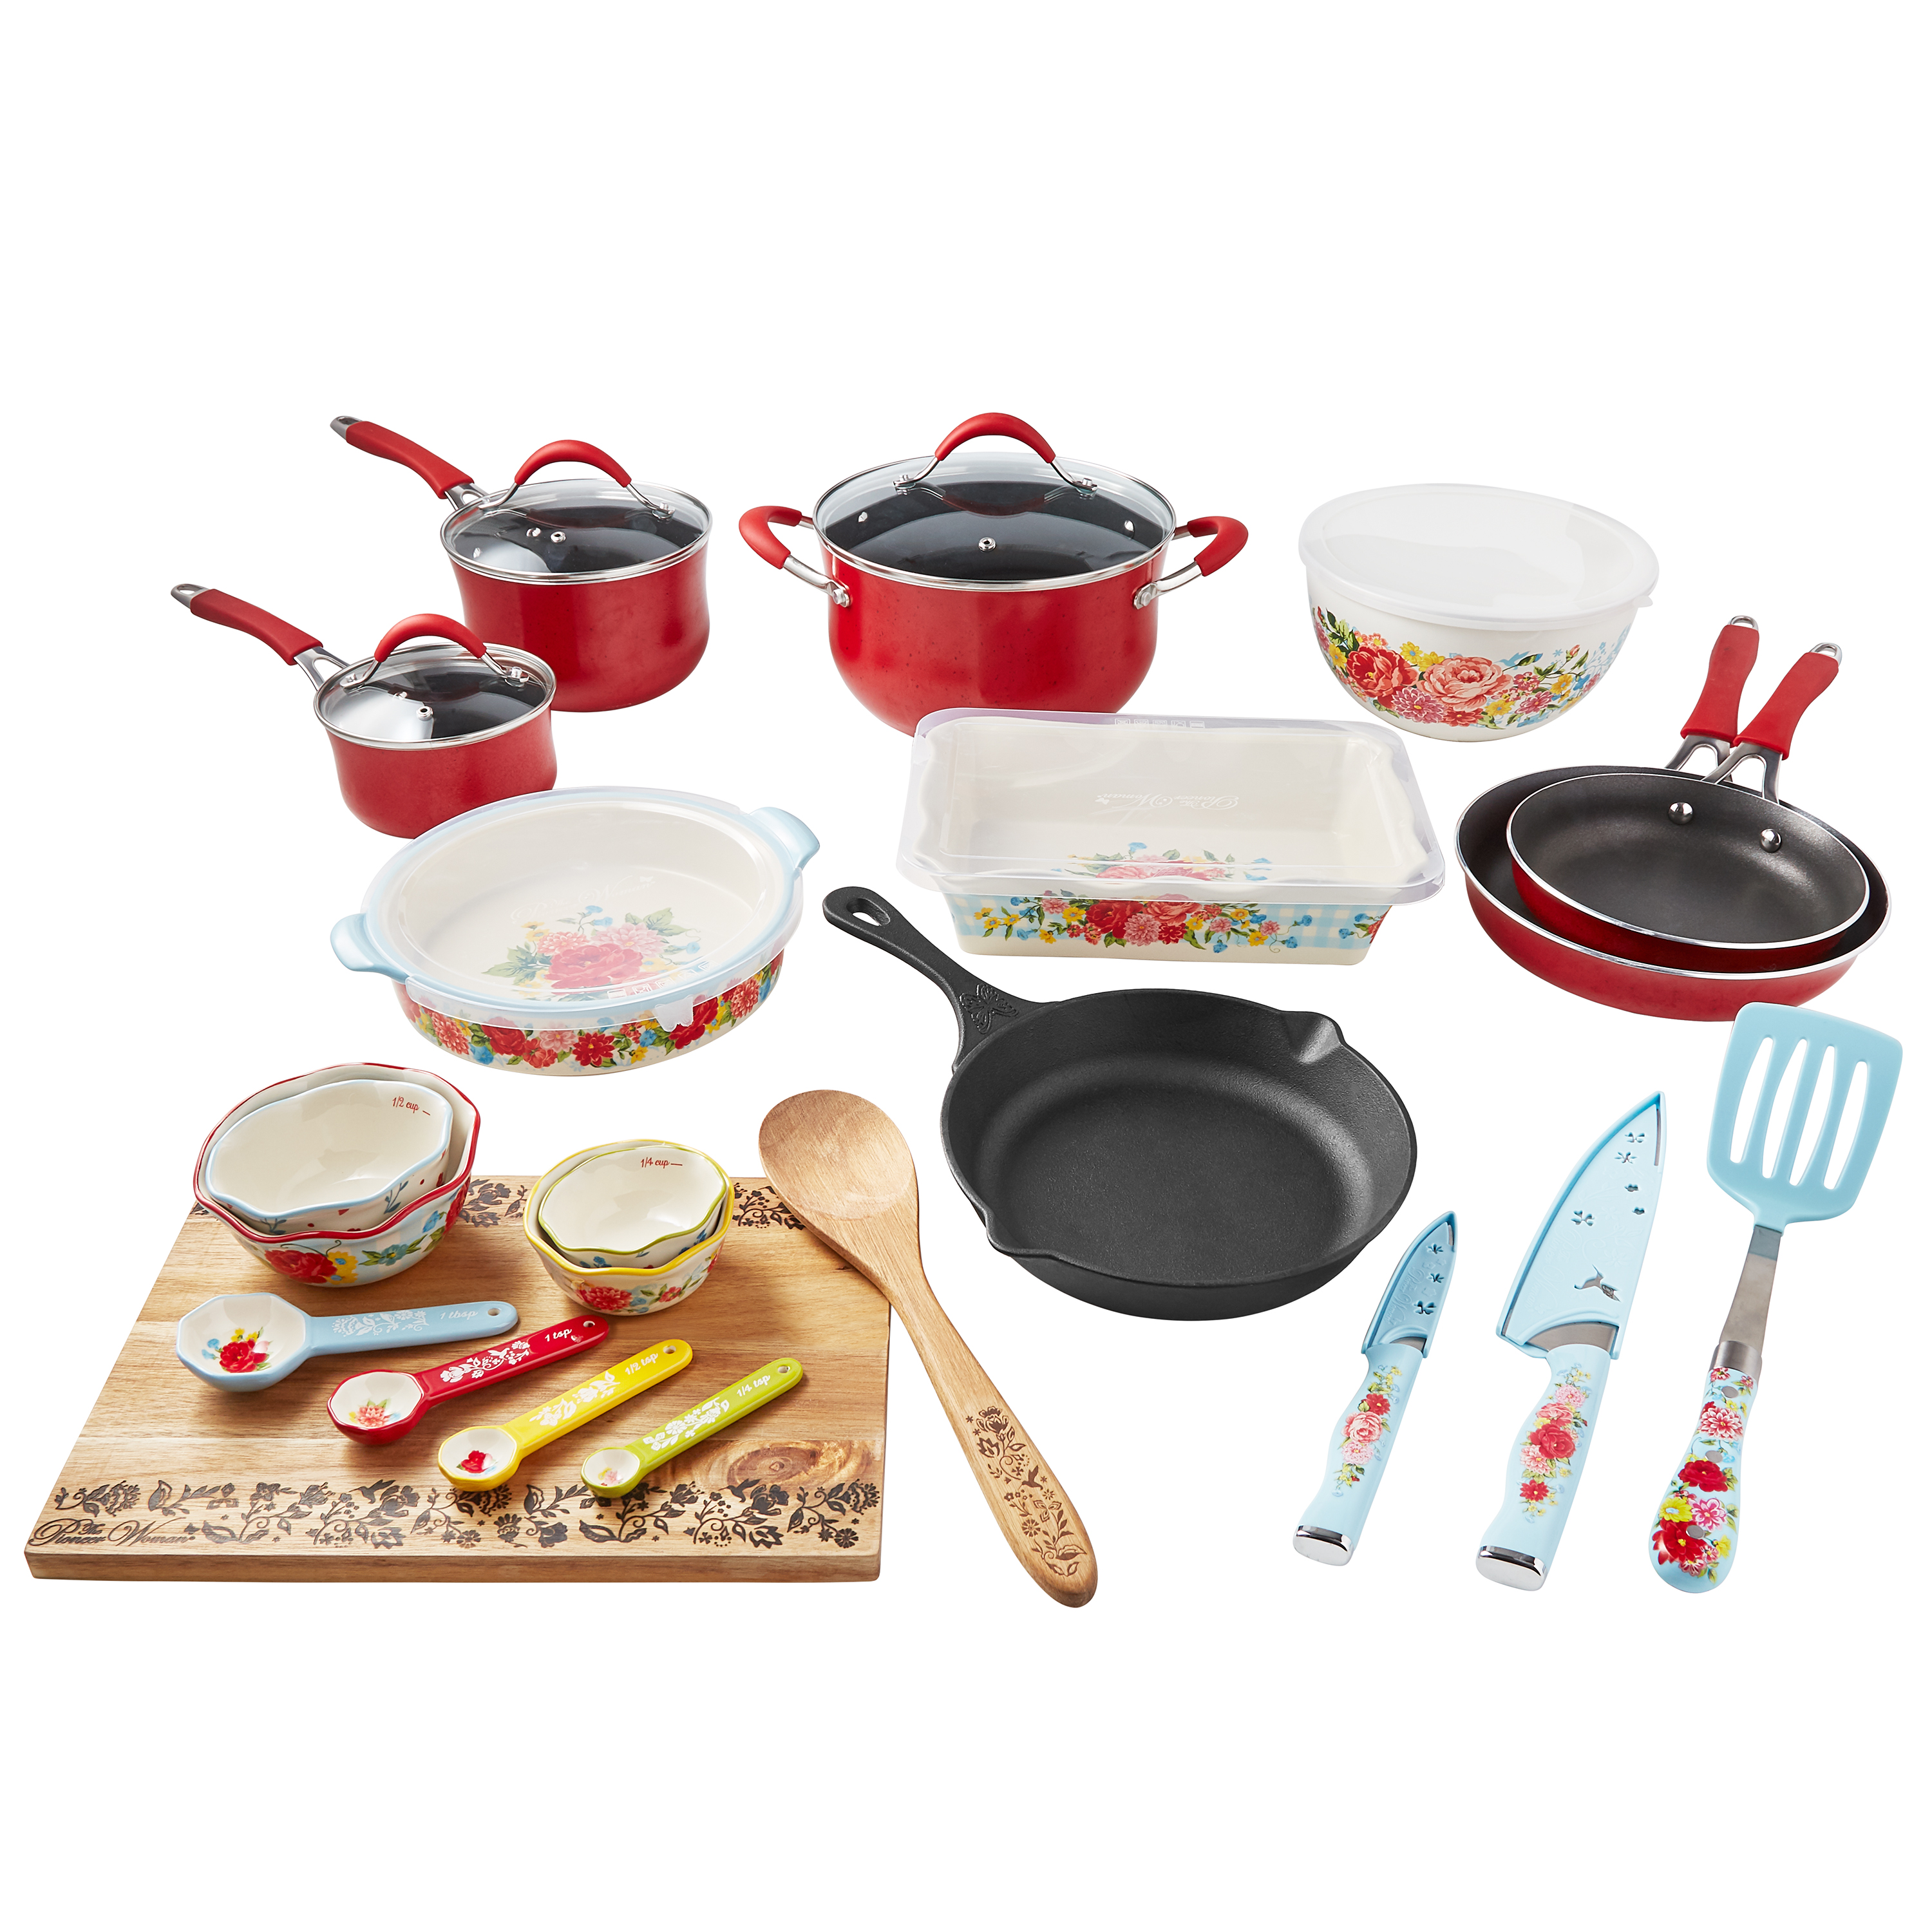 The Pioneer Woman Sweet Romance 30-Piece Nonstick Cookware Set, Red - image 1 of 13